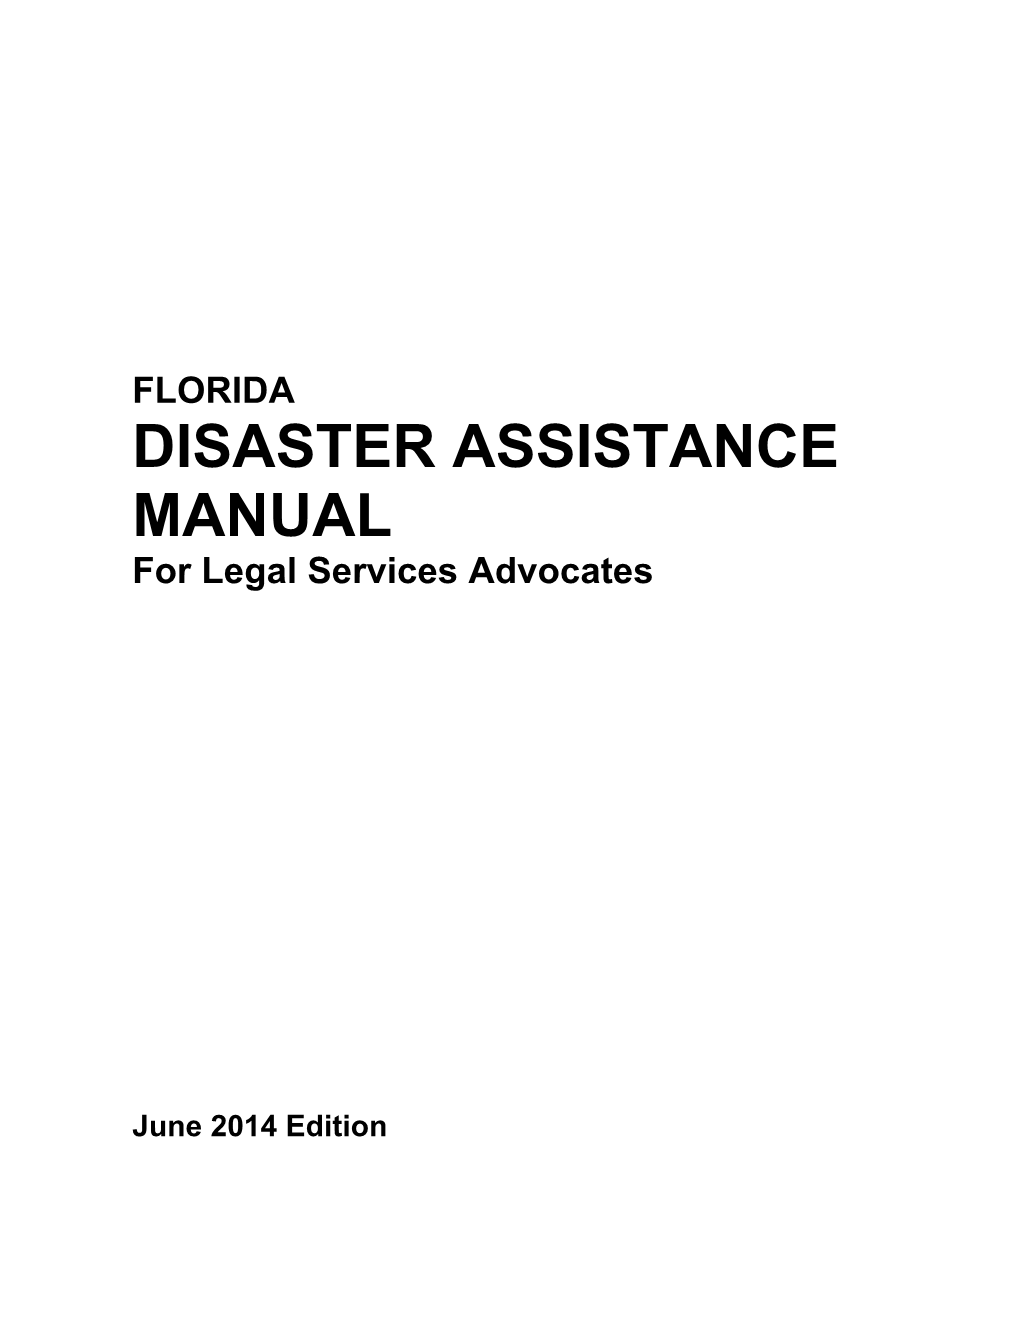 DISASTER ASSISTANCE MANUAL for Legal Services Advocates